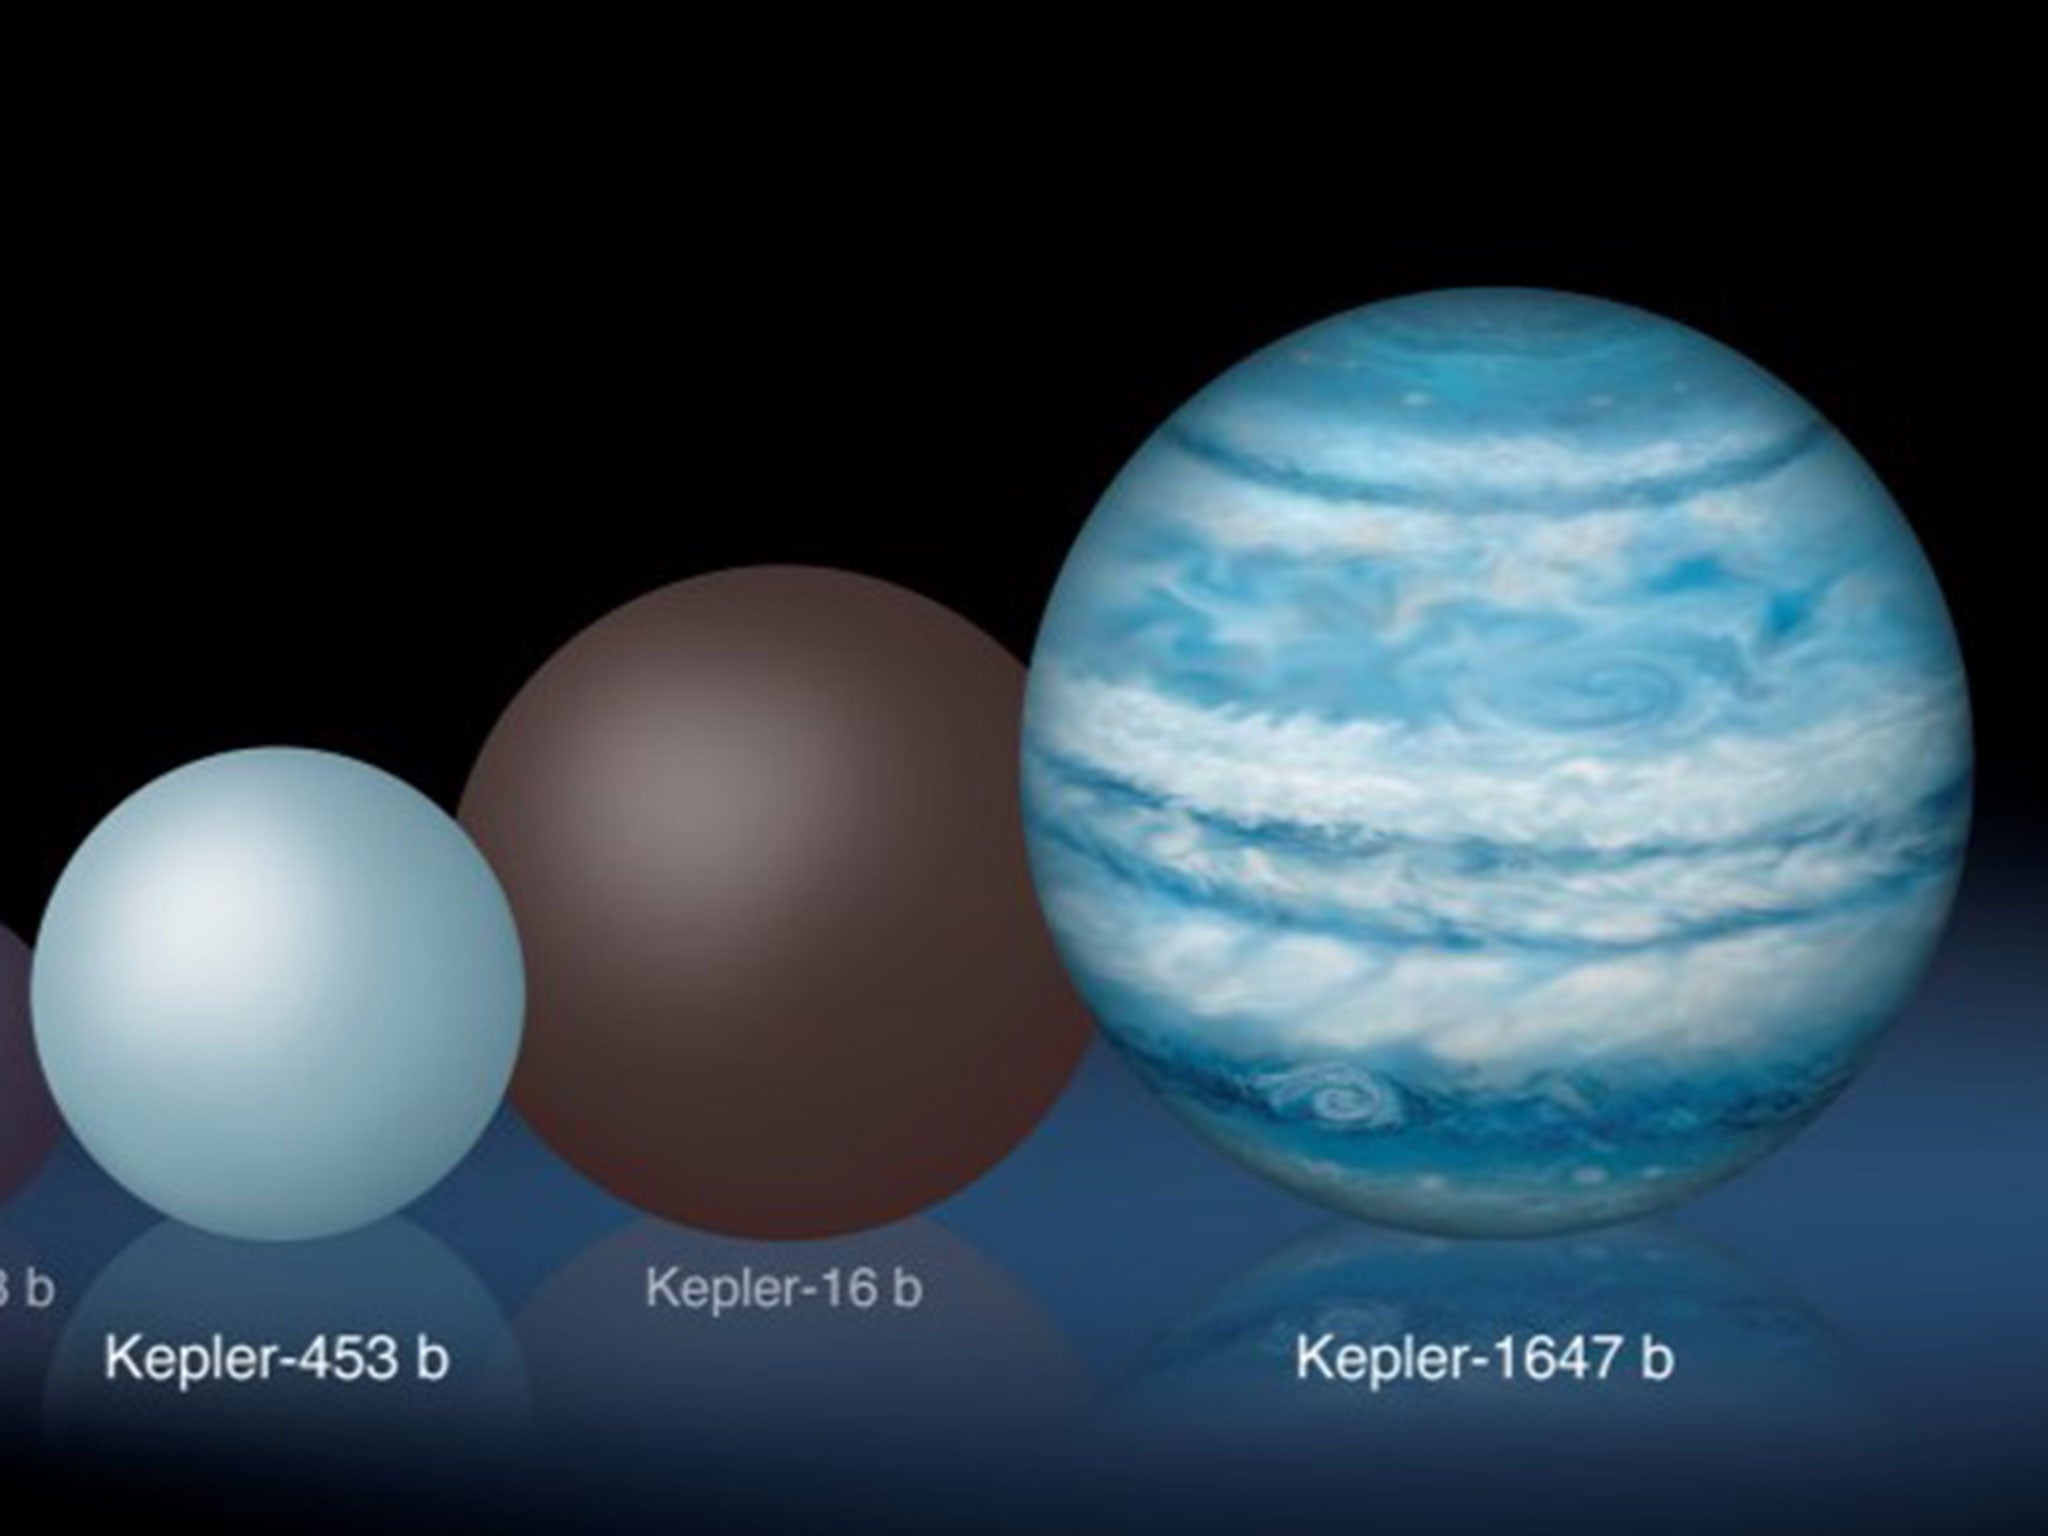 Comparison of the relative sizes of several Kepler circumbinary planets. Kepler-1647 b is substantially larger than any of the previously known circumbinary planets